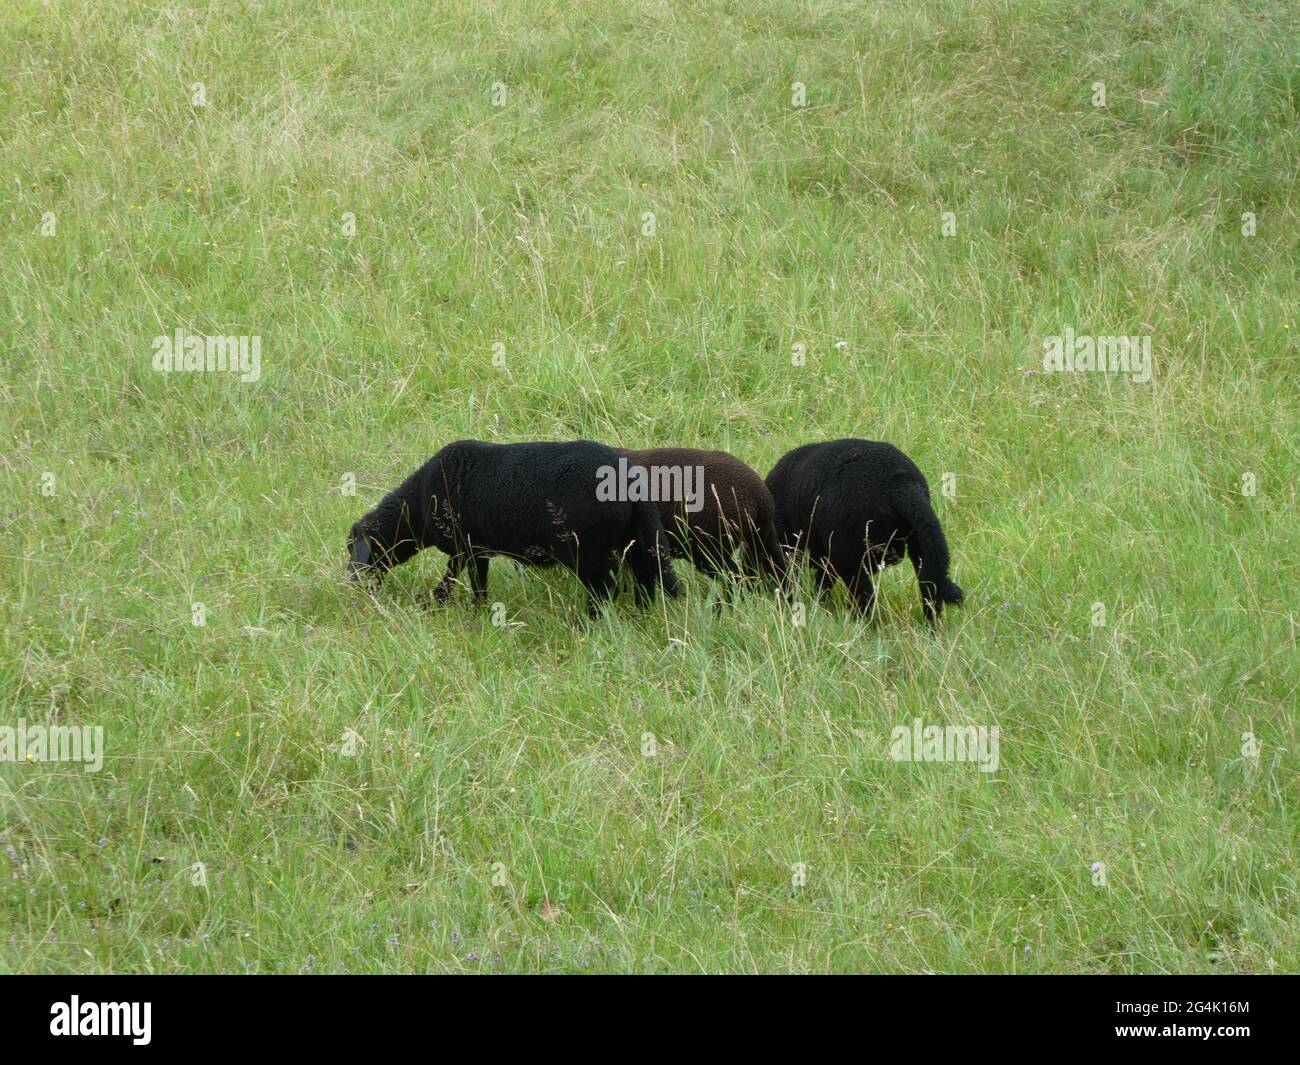 Three black sheeps grazing together on green meadow Stock Photo